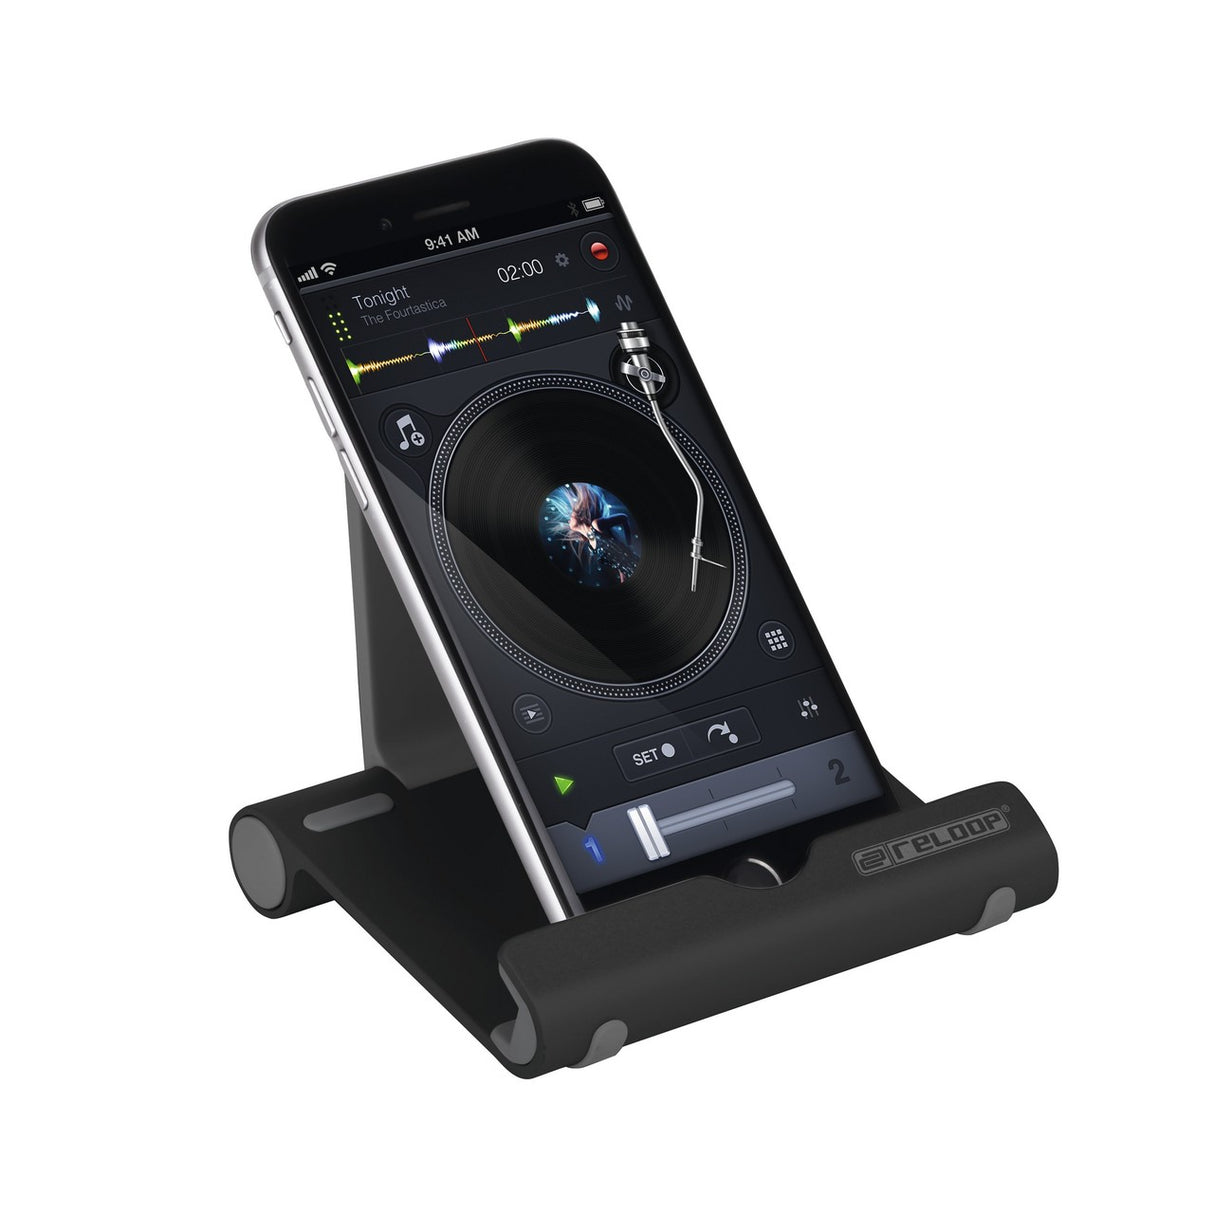 Reloop Tablet Stand | Optional Stand for iPads, Tablets, iPhones and Androids